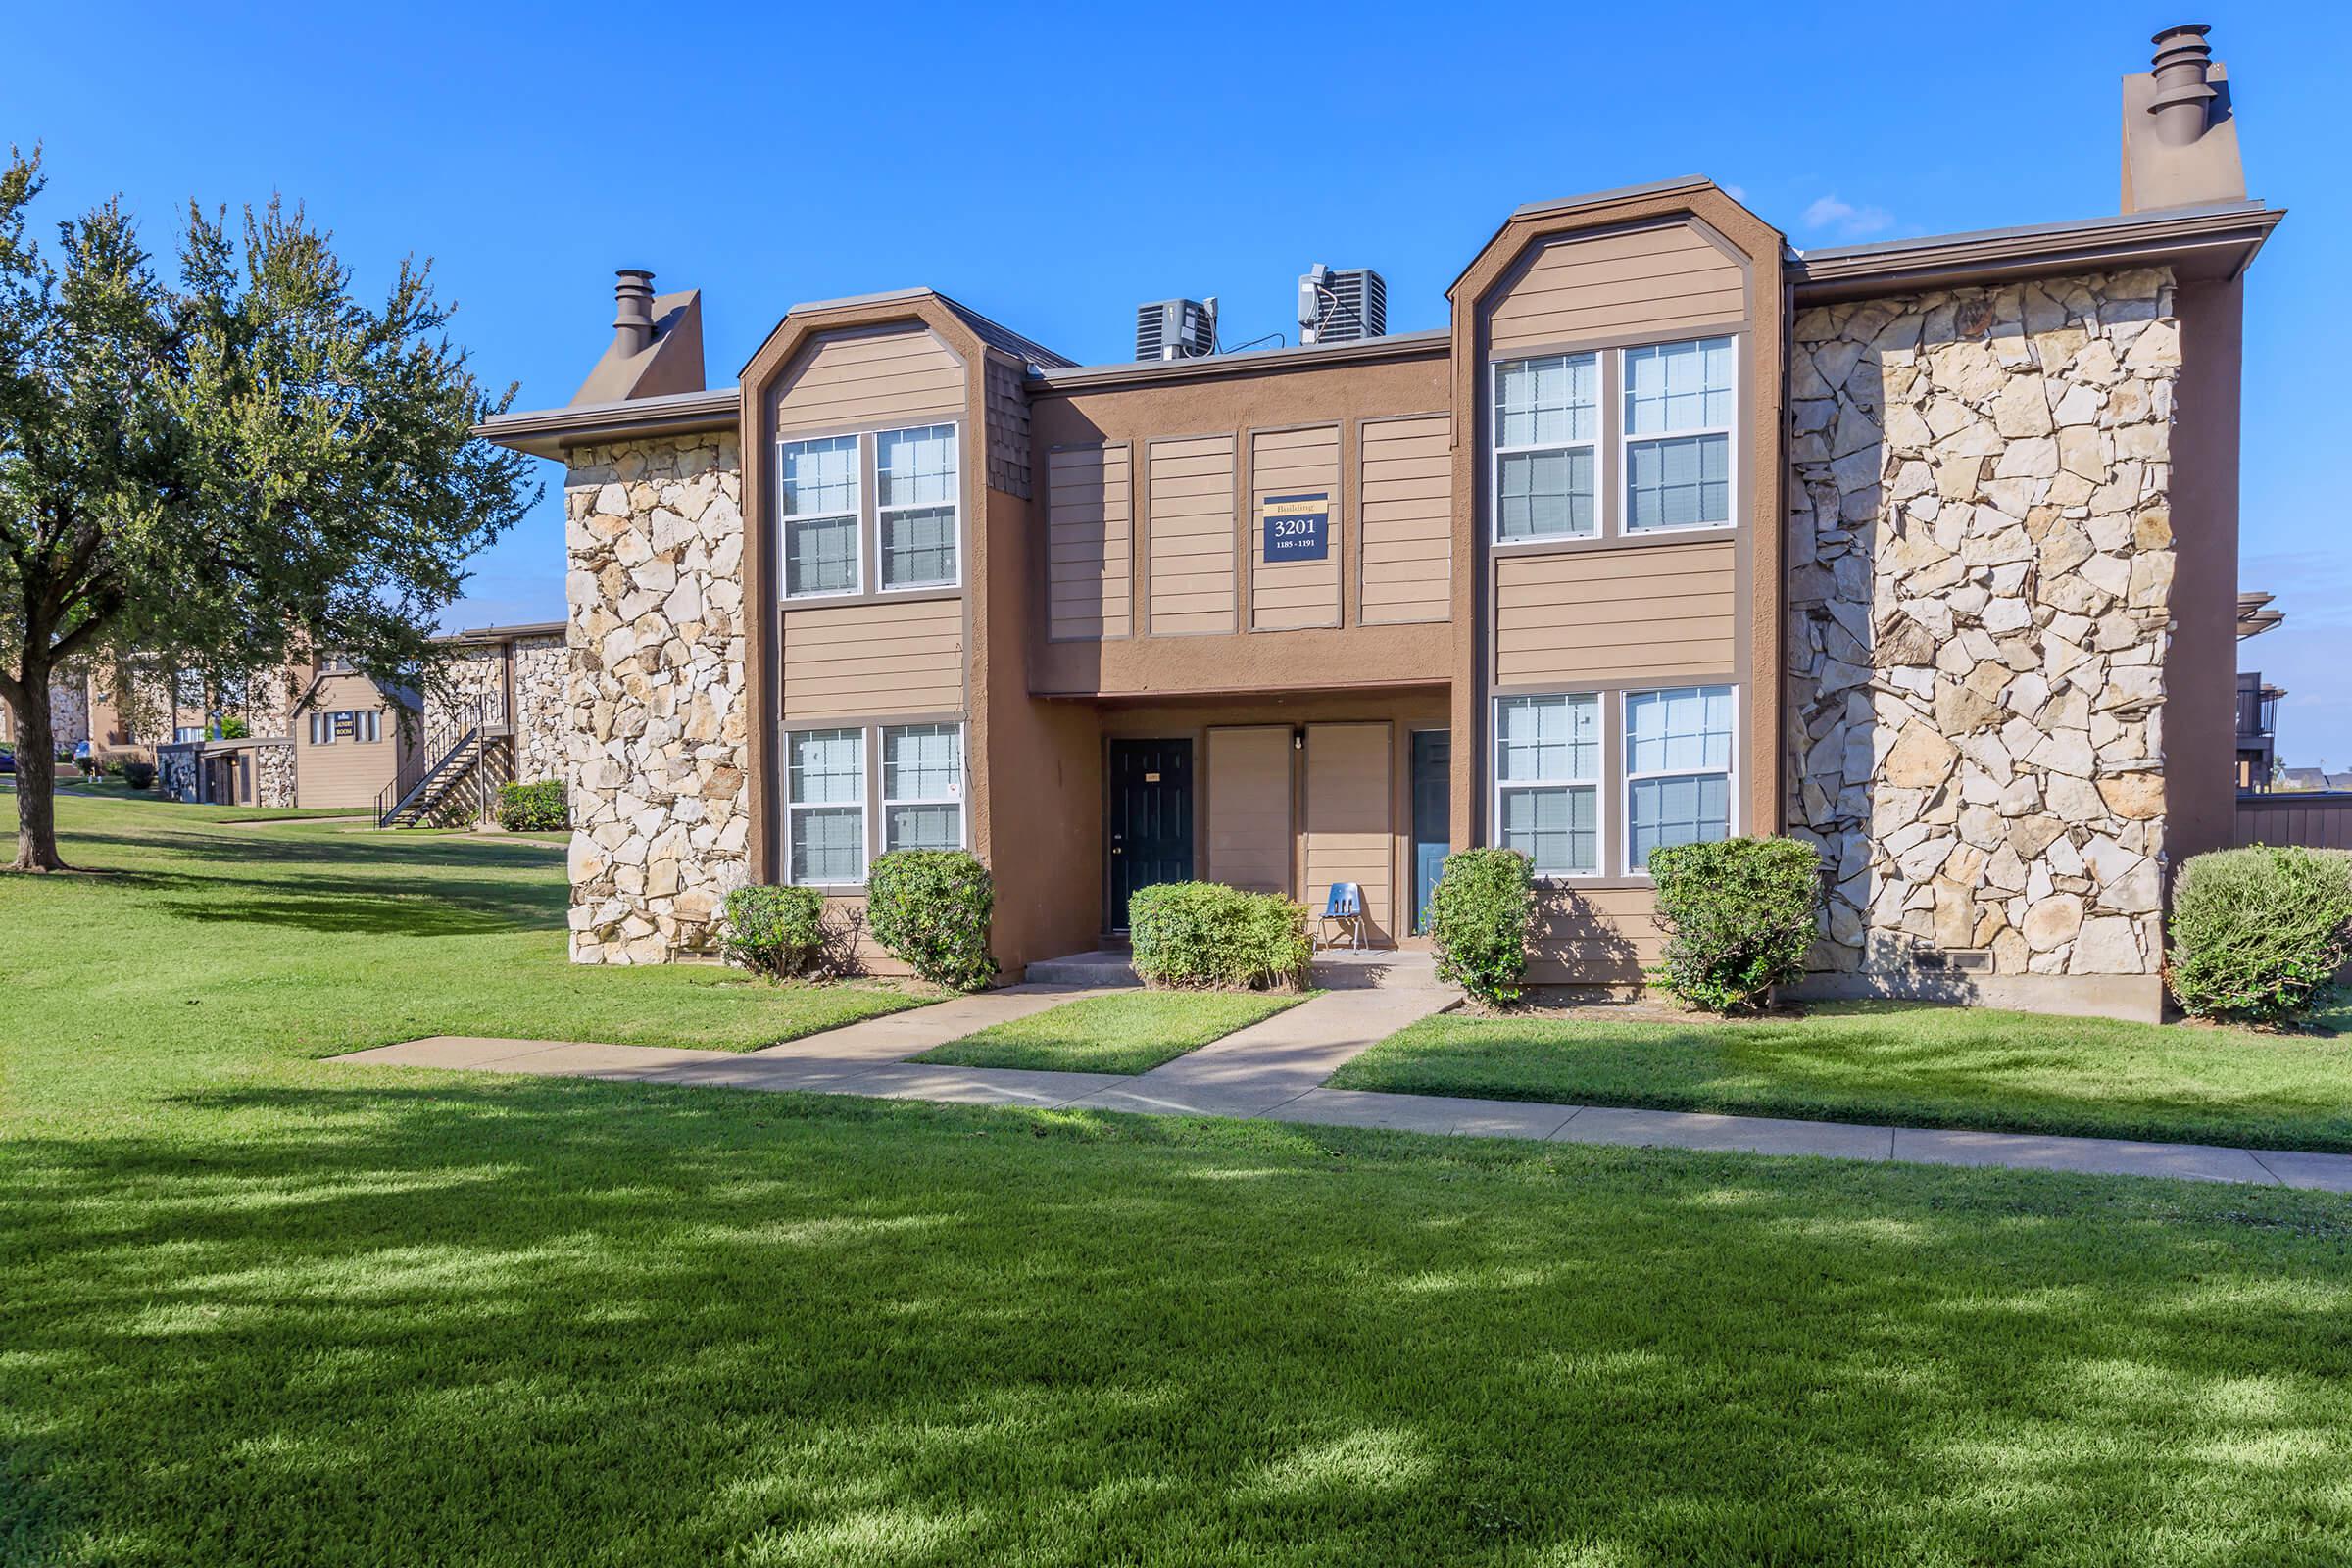 LOVELY APARTMENT HOMES FOR RENT IN IRVING, TX.